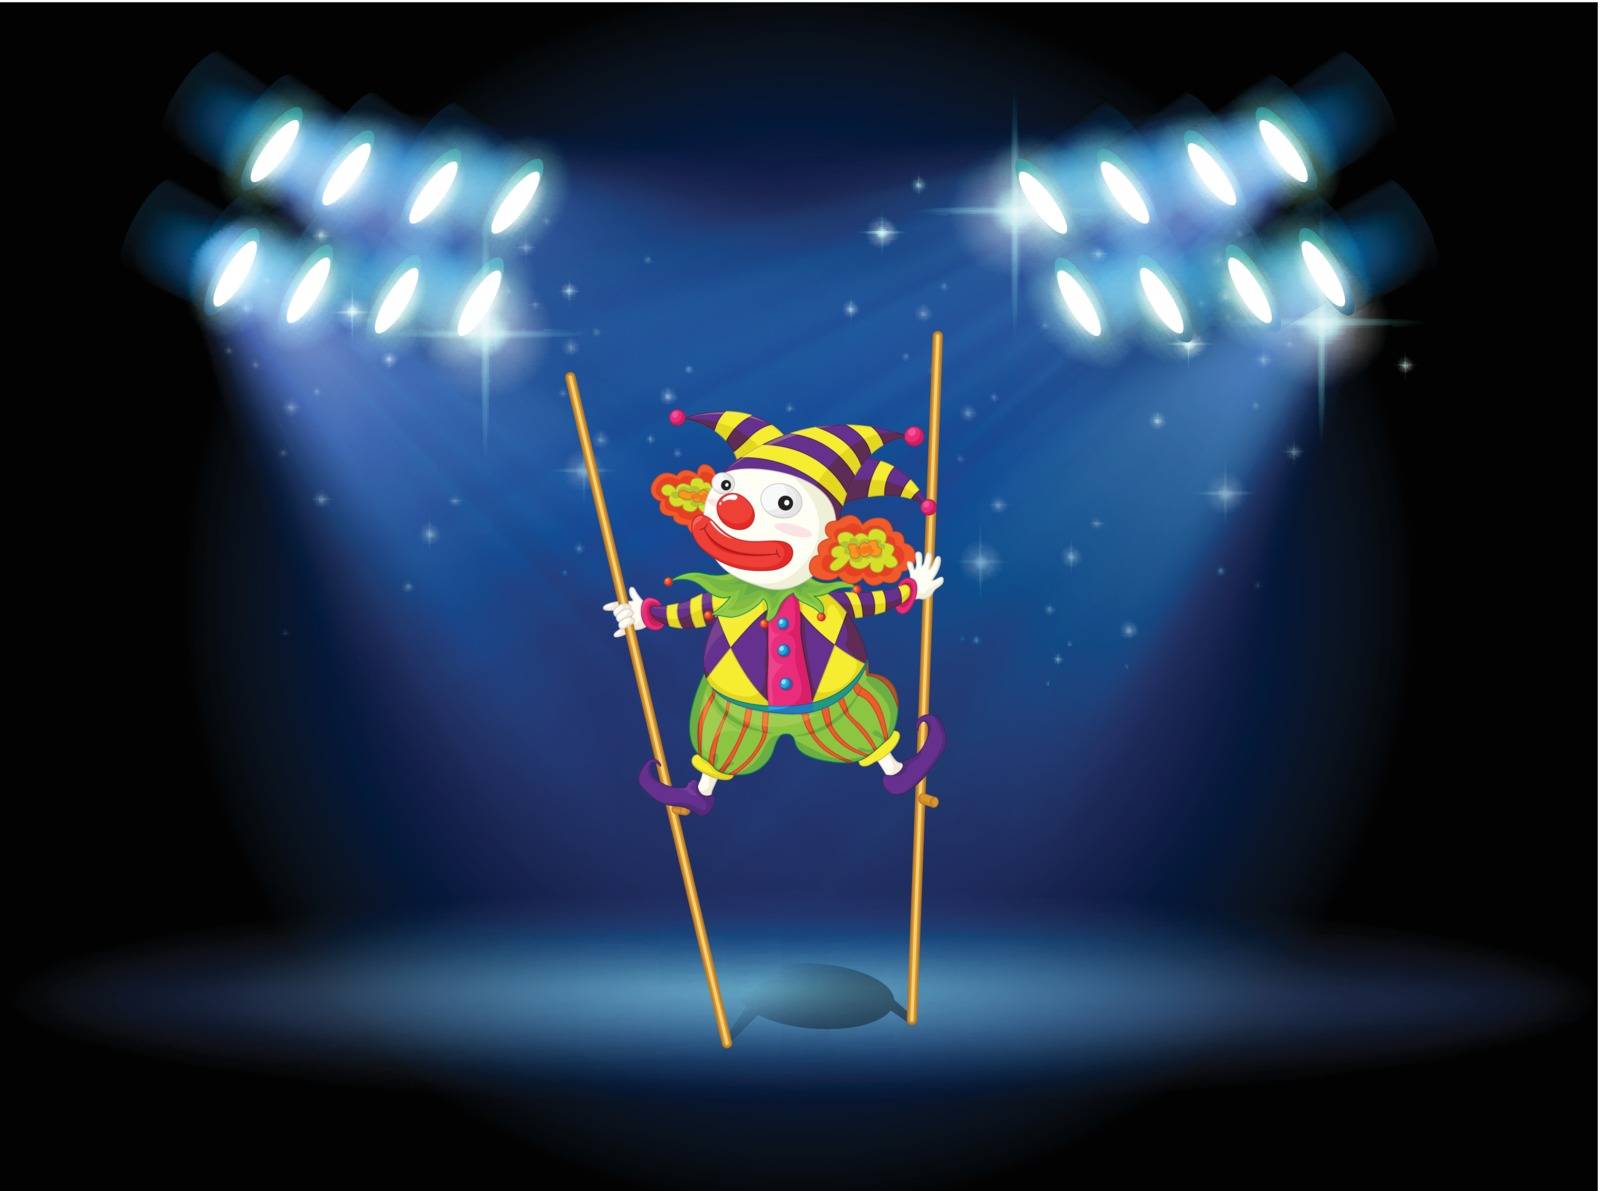 Illustration of a clown doing a trick at the stage